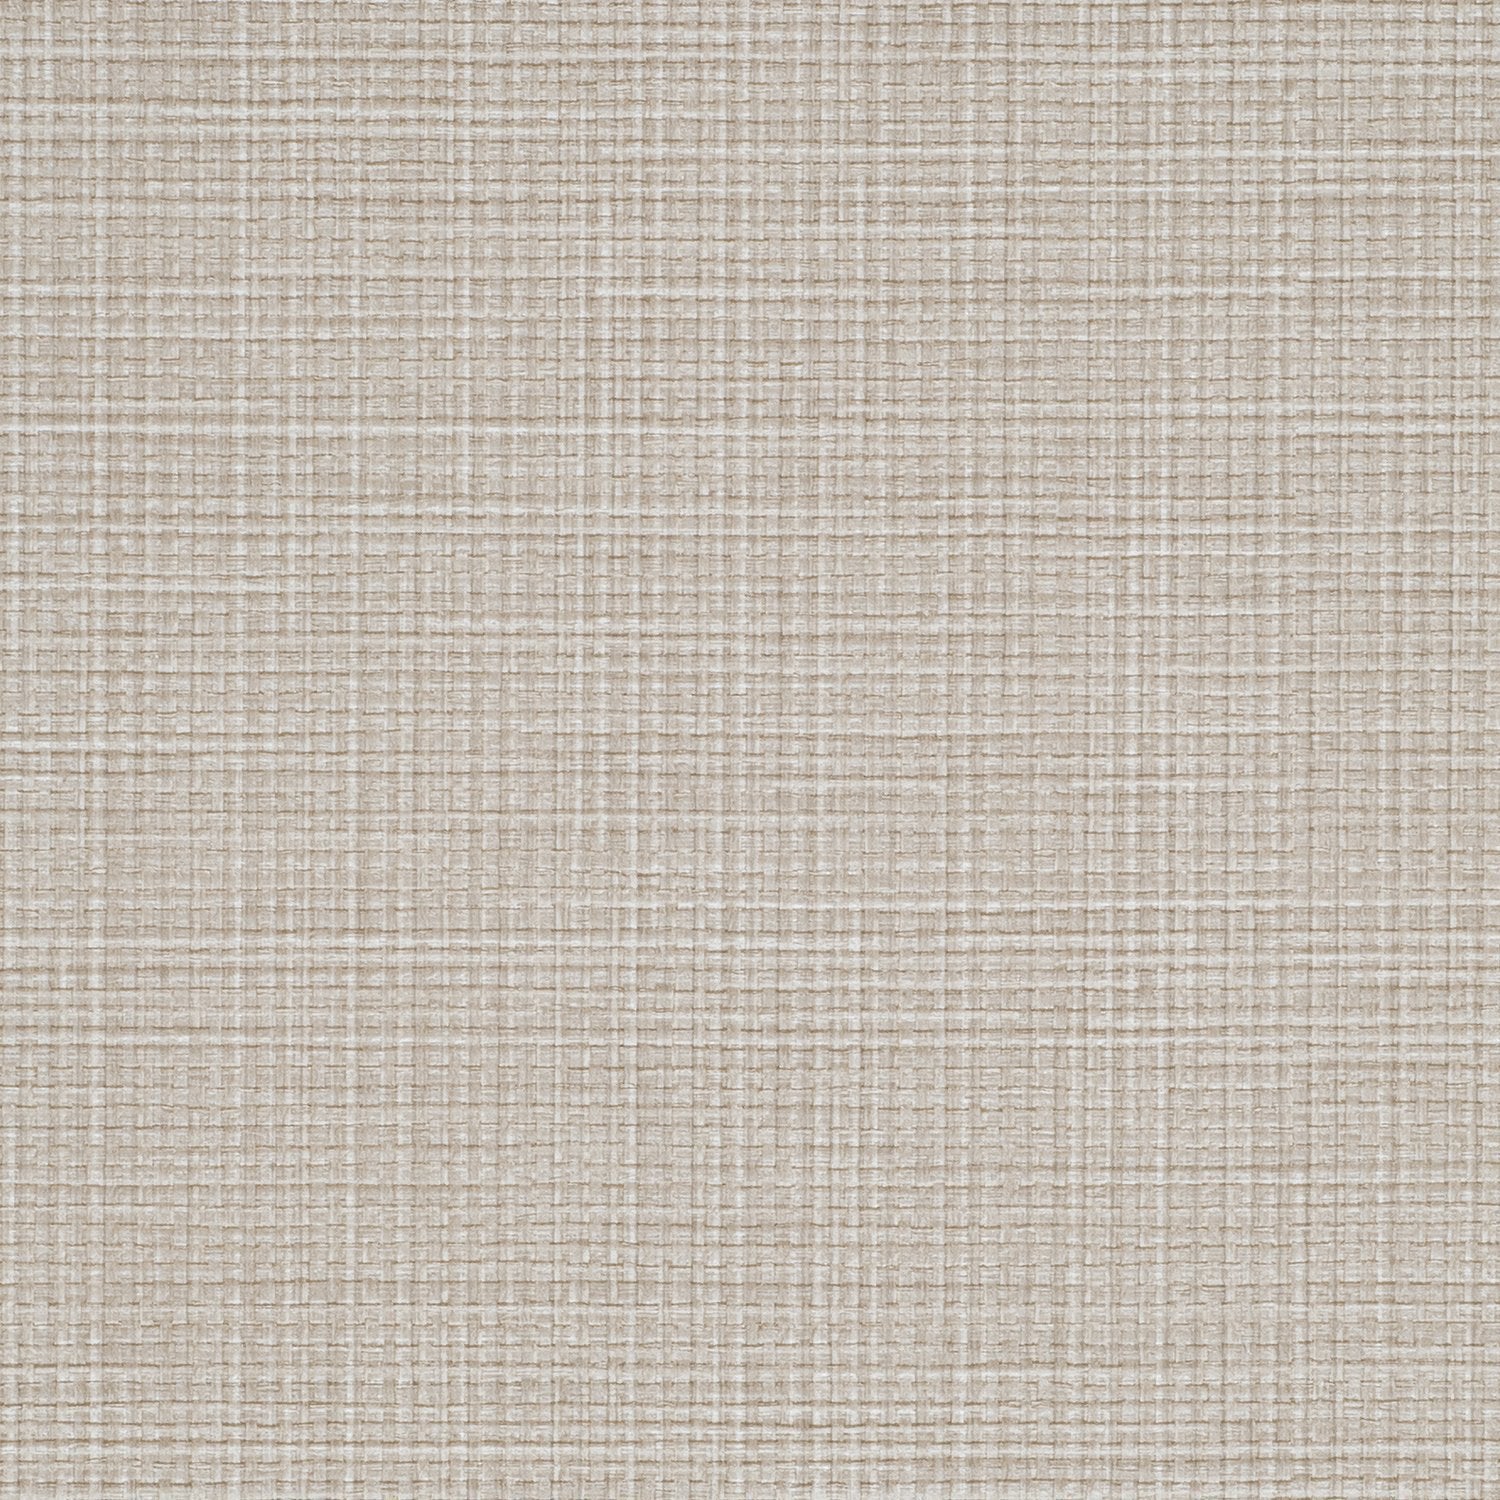 Pave - Y46288 - Wallcovering - Vycon - Kube Contract